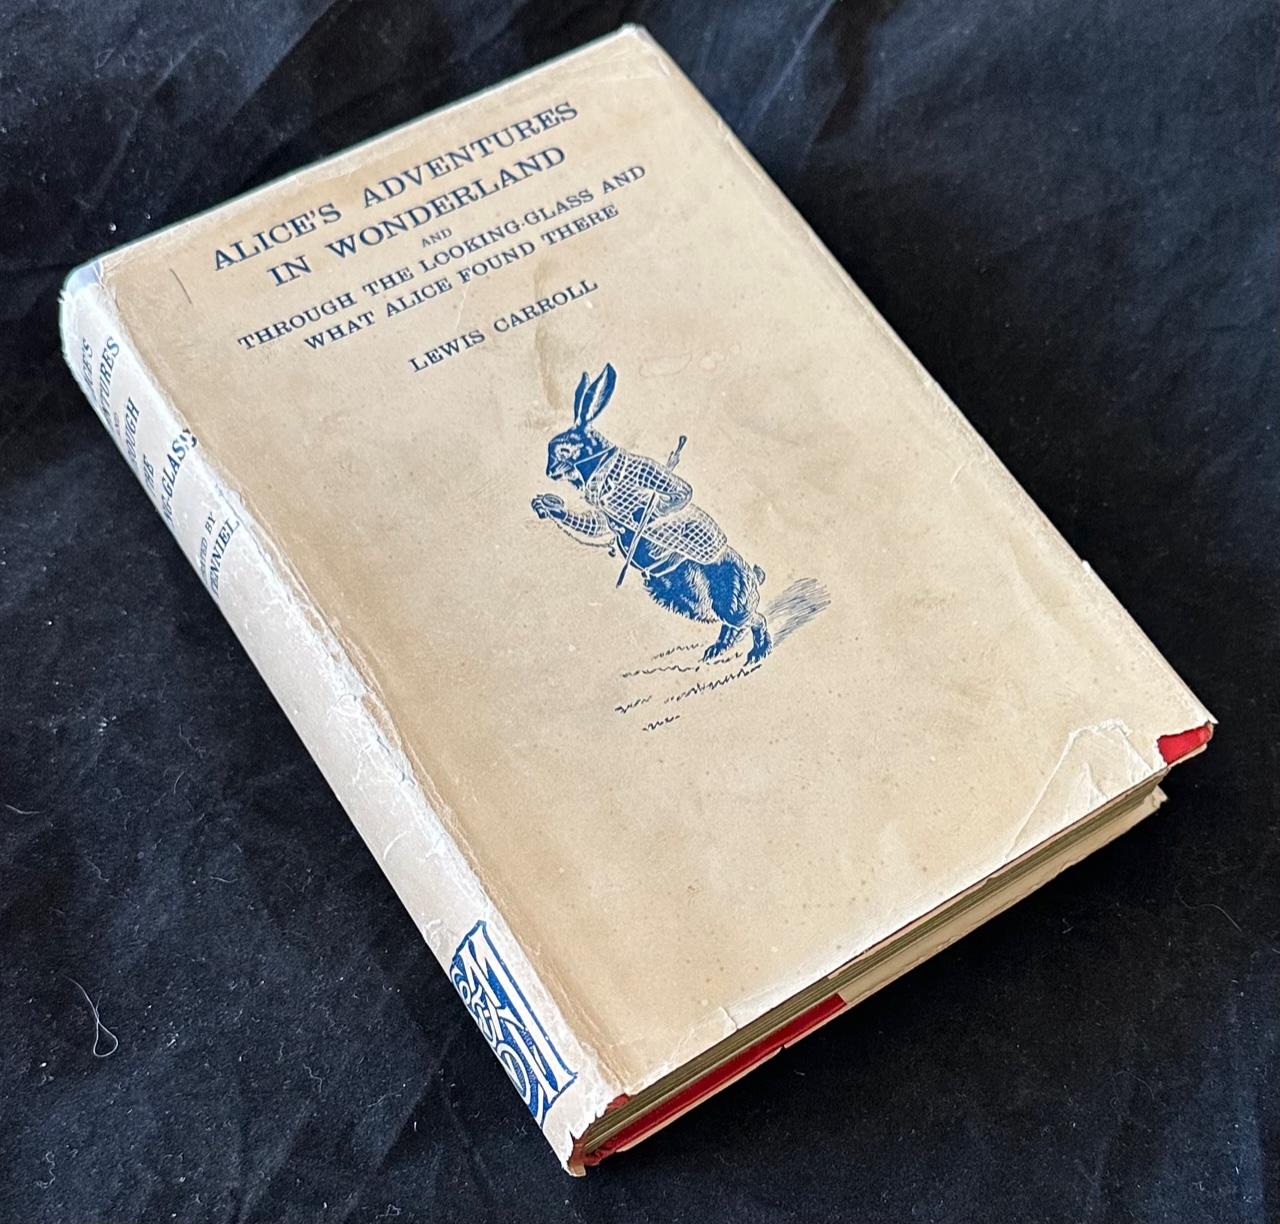 ALICE'S ADVENTURES IN WONDERLAND. THROUGH THE LOOKING GLASS. (First Macmillan Edition Printed In Colour with 16 full page colour plates by John Tenniel in DUST JACKET)